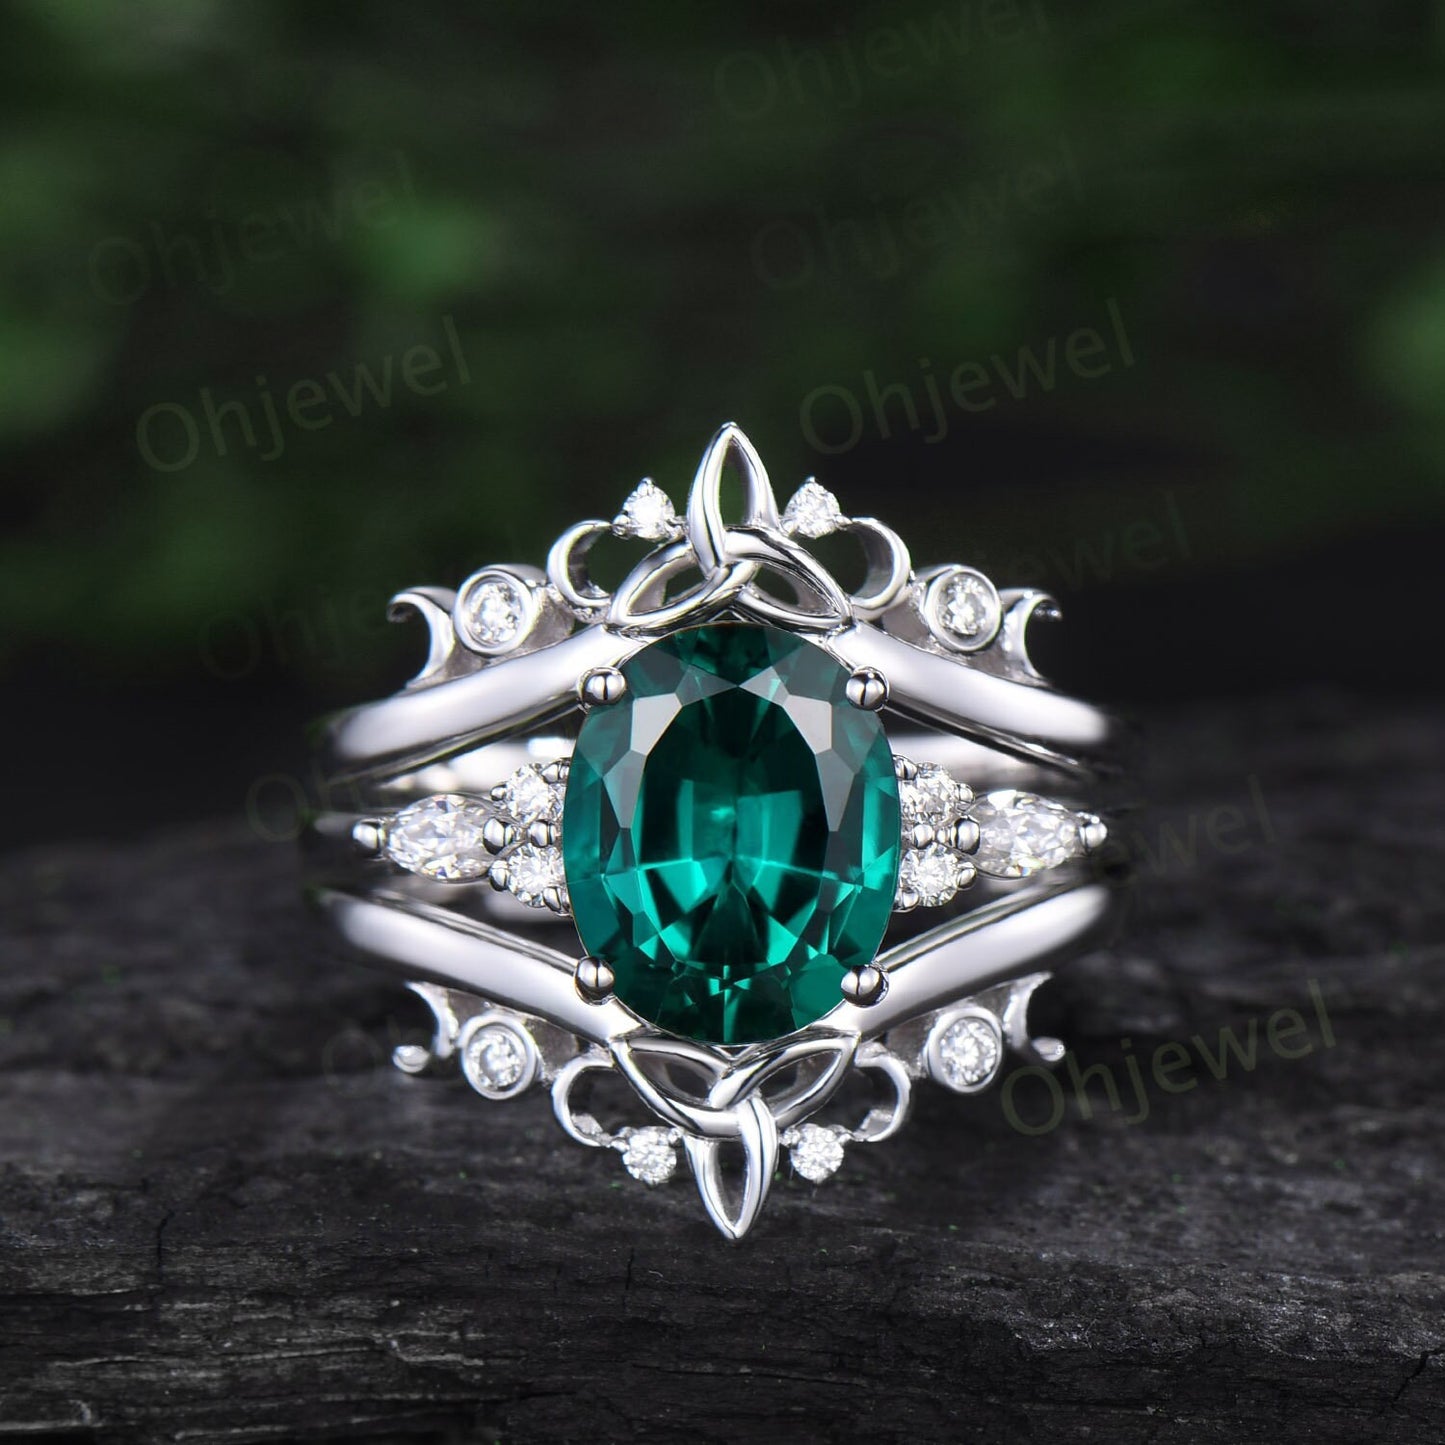 8x10mm oval cut Emerald engagement ring set solid 14k white gold Celtic knot diamond ring vintage fine jewelry stacking bridal set women